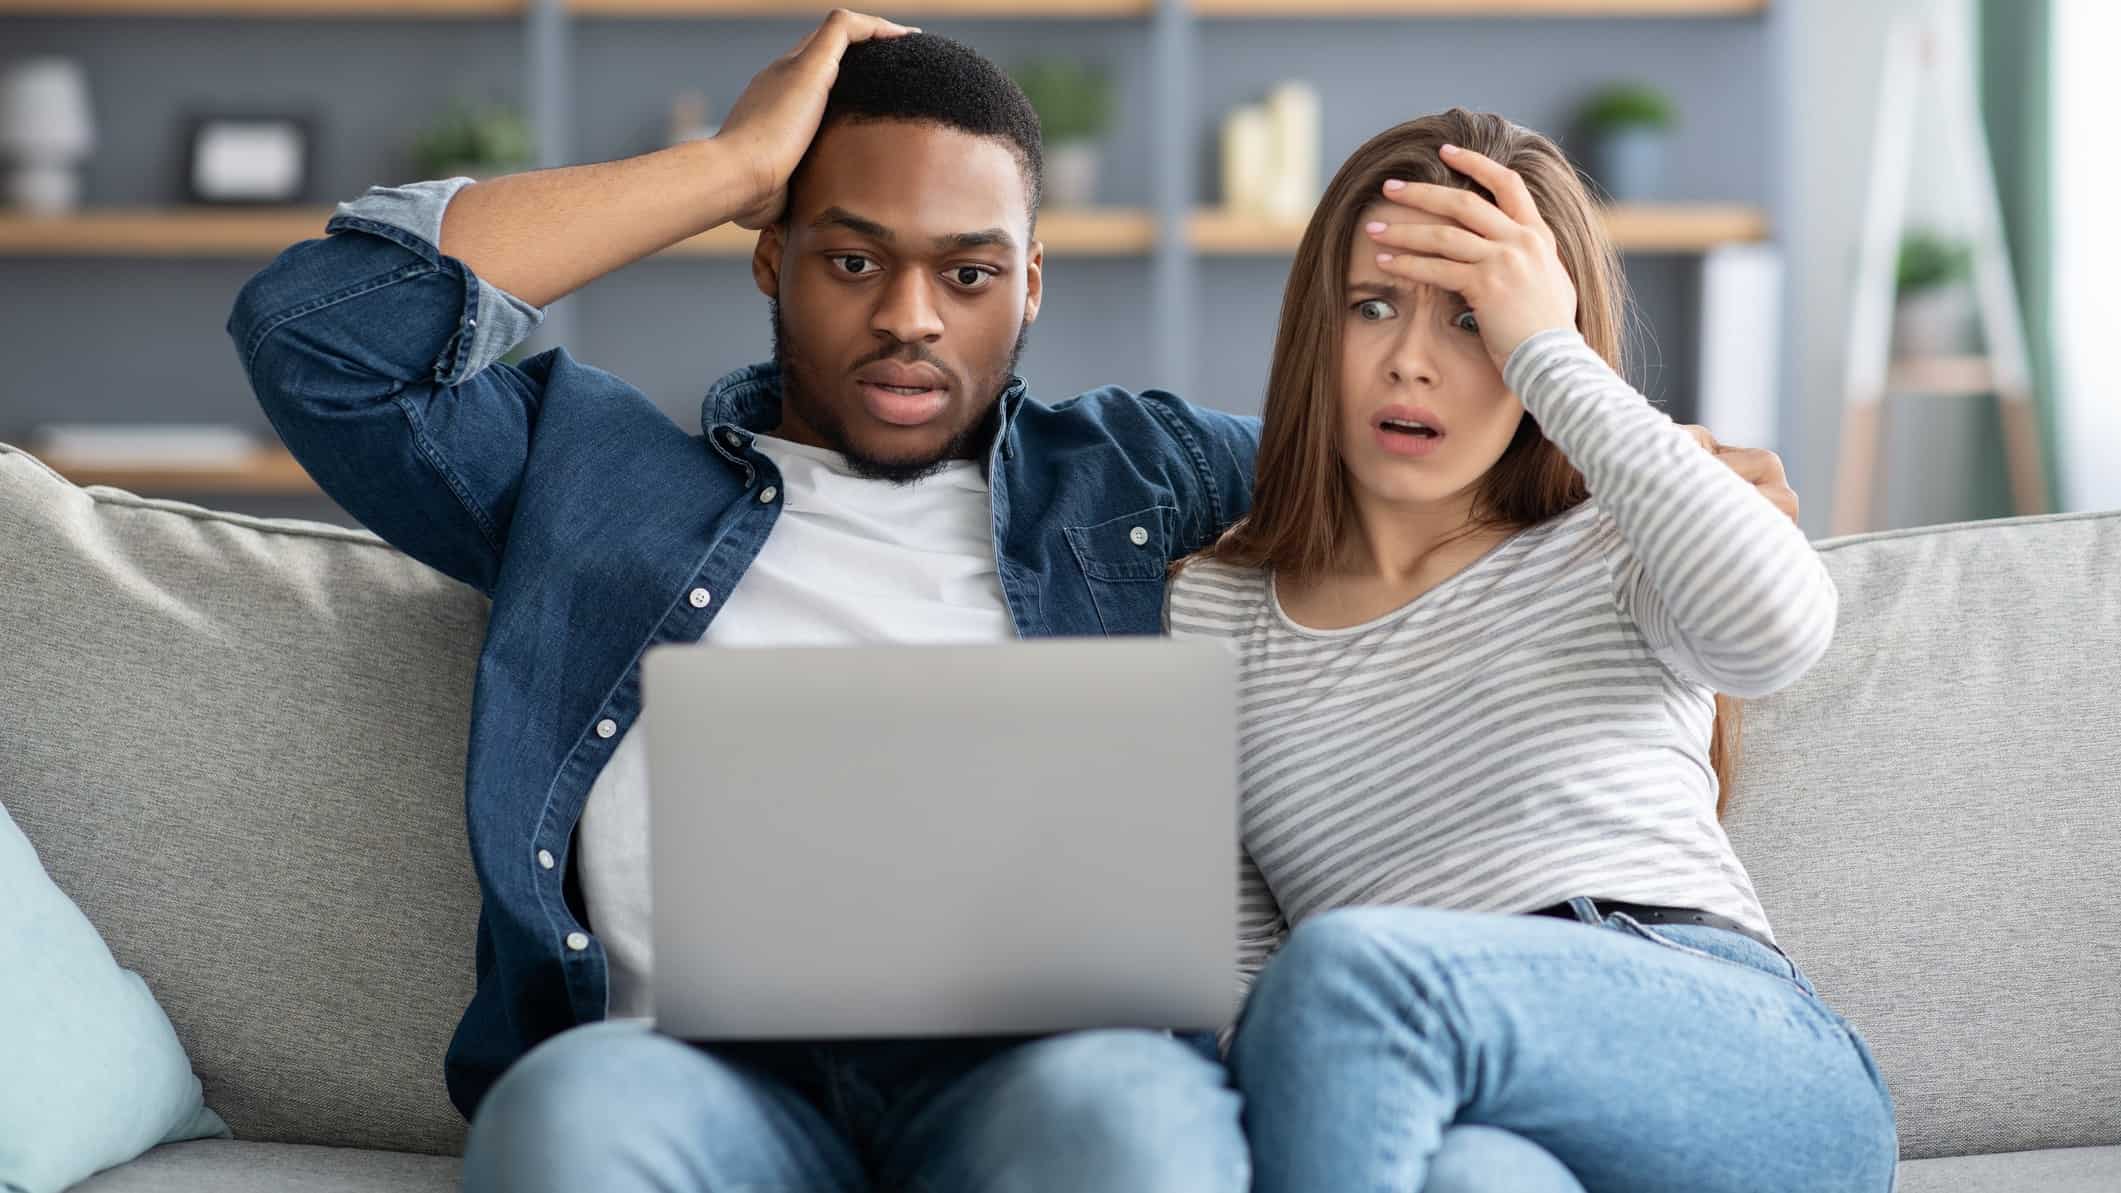 A couple sits on a sofa, each clutching their heads in horror and disbelief, while looking at a laptop screen showing the Nickel Industries share price has dropped by 36% since early March